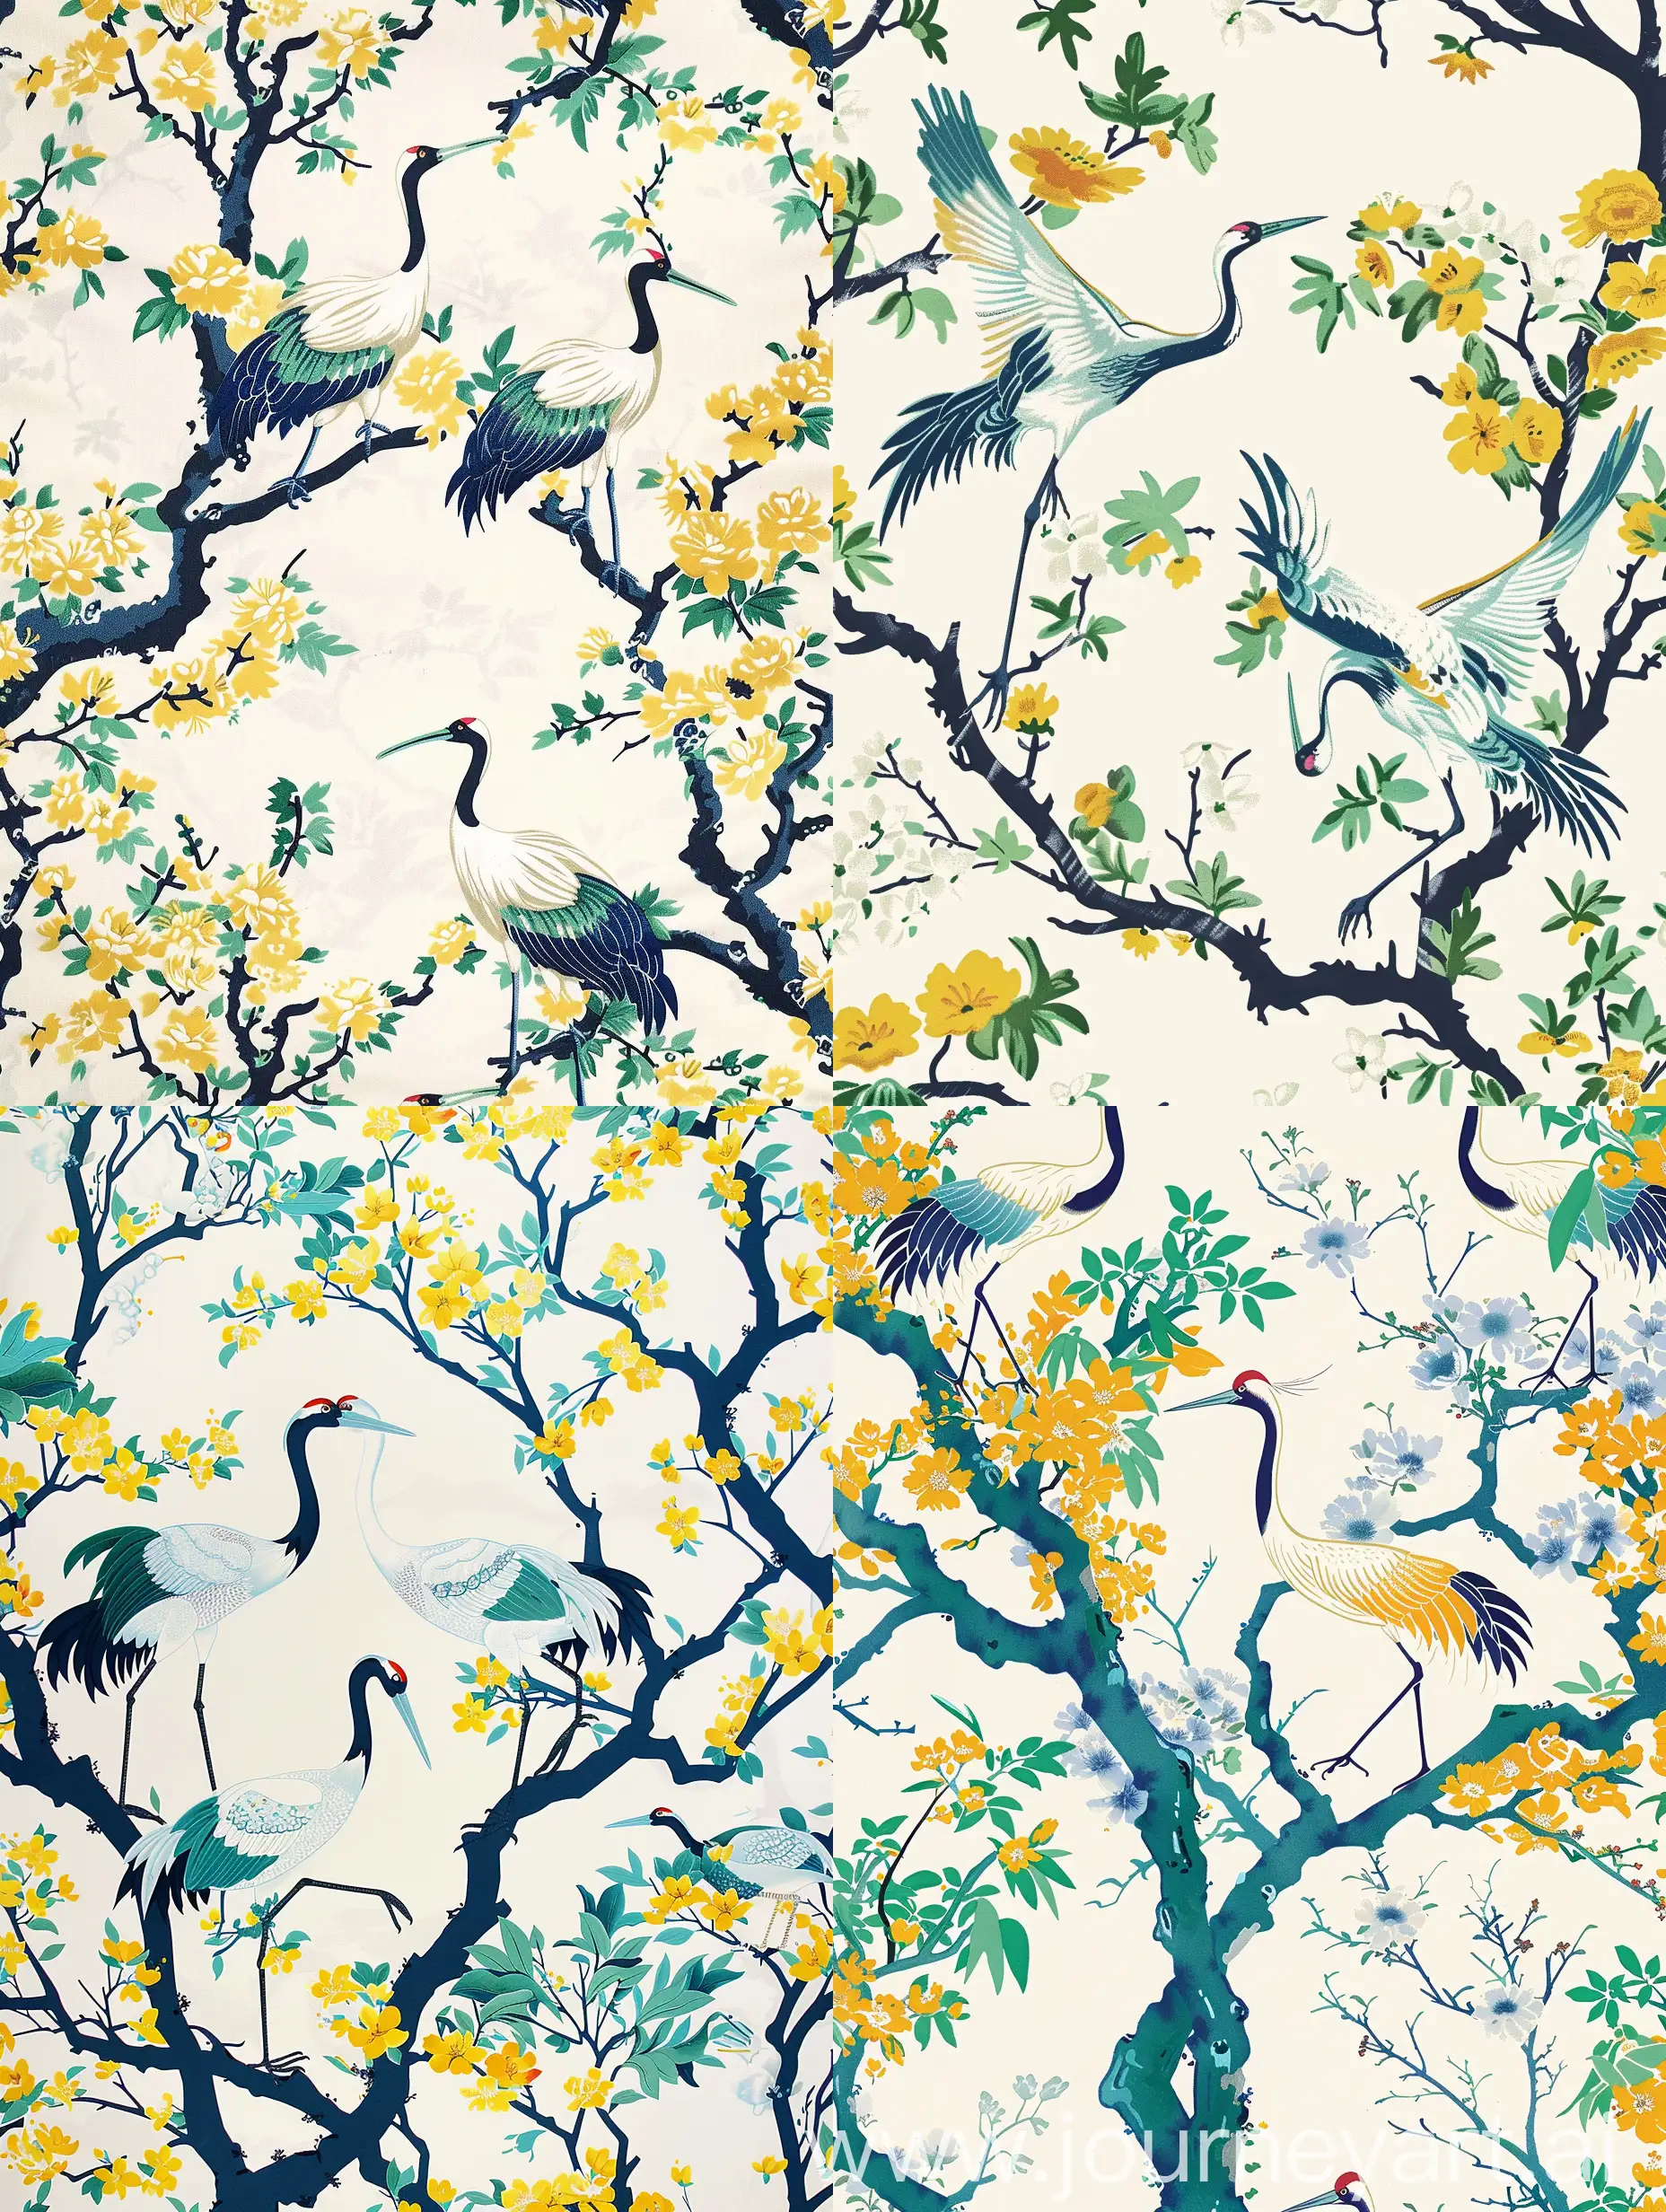 Colorful-Crane-Birds-in-Blossoming-Trees-on-White-Background